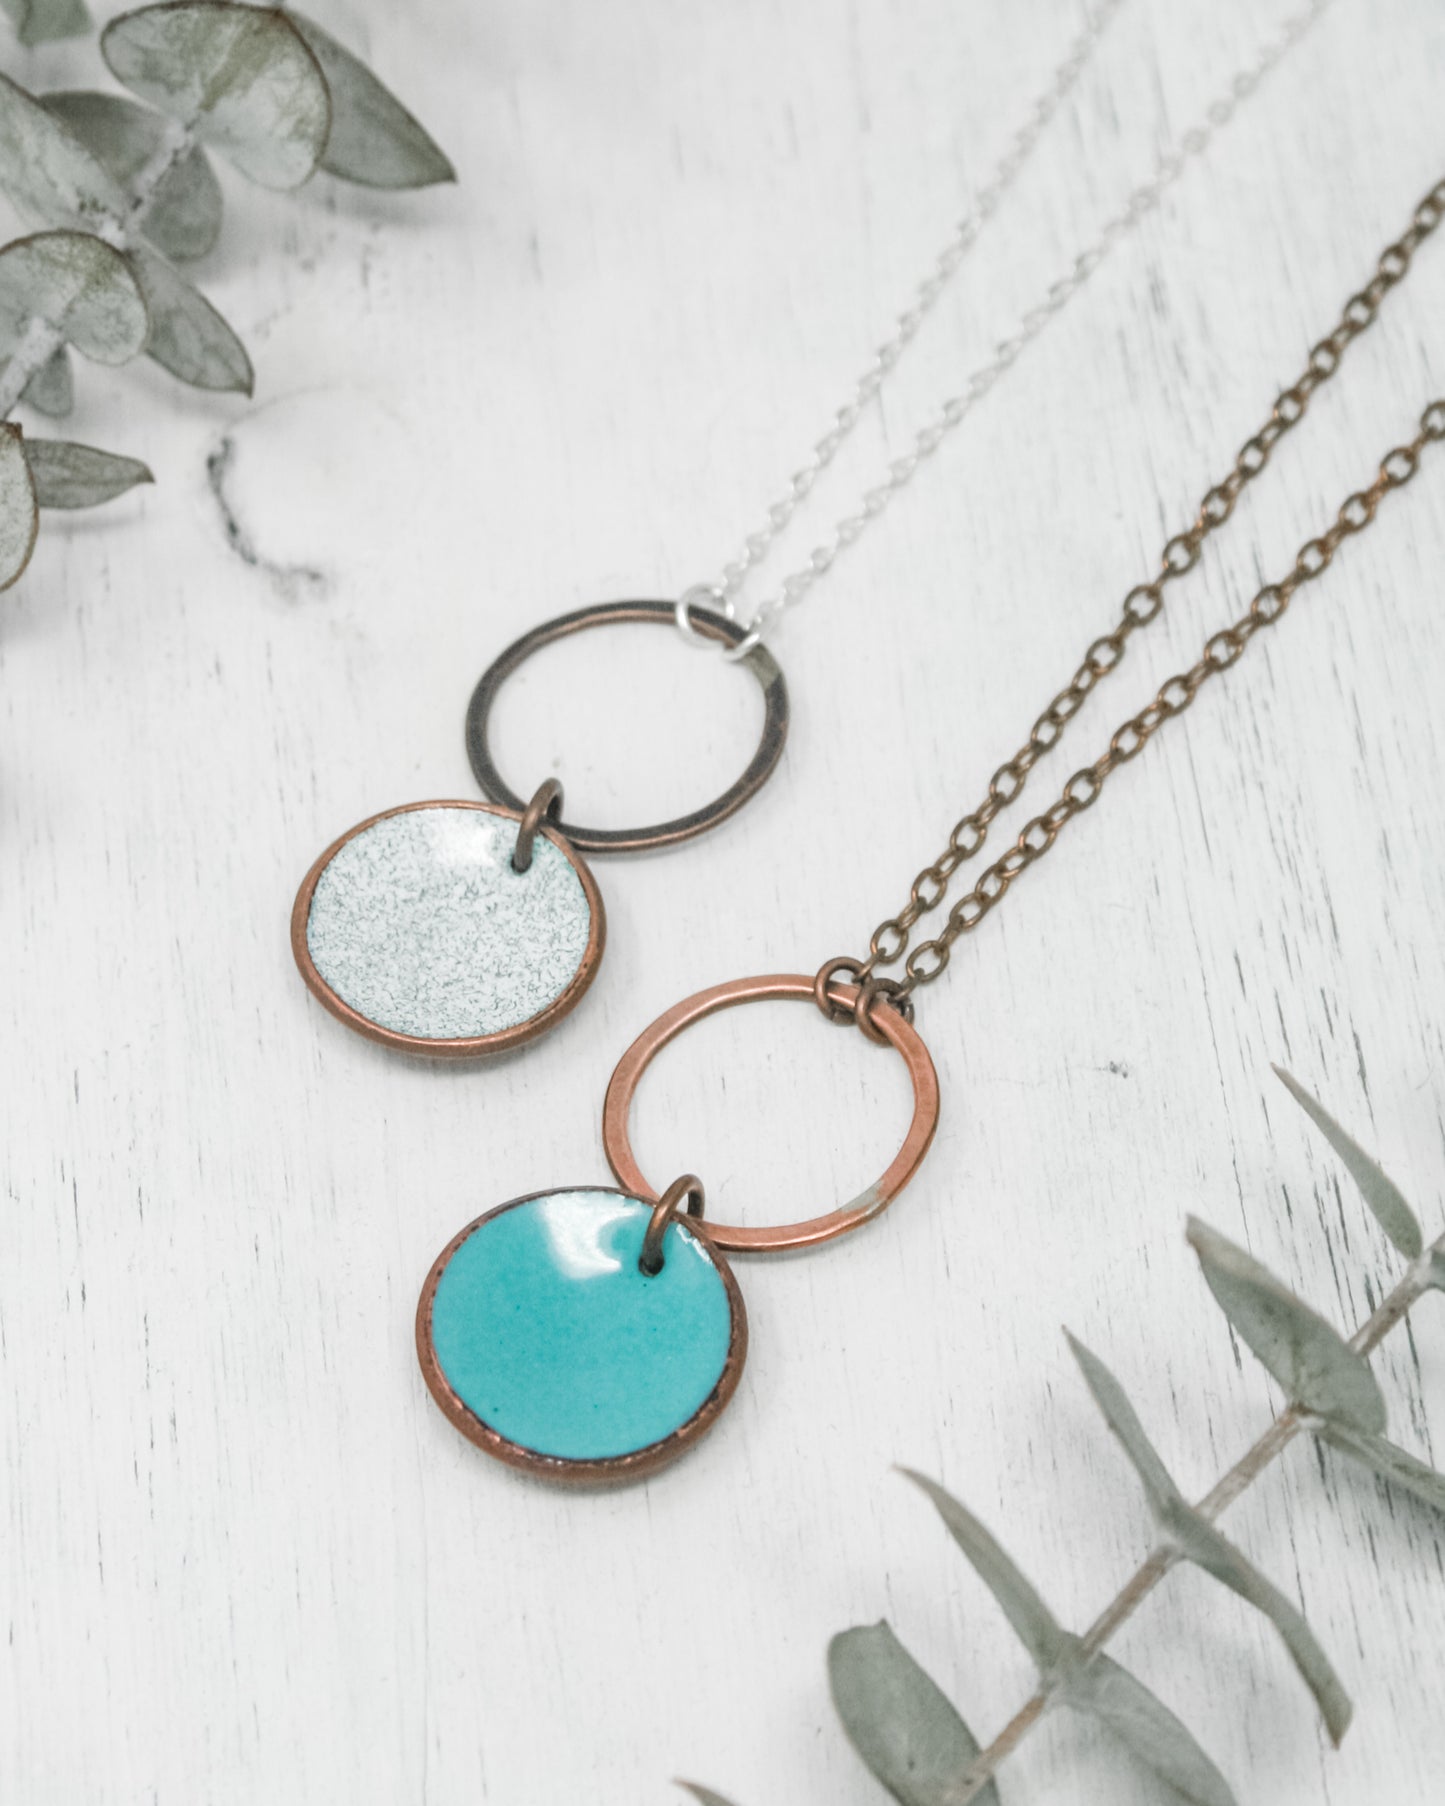 Medium copper Revolve Penny necklaces [made to order]